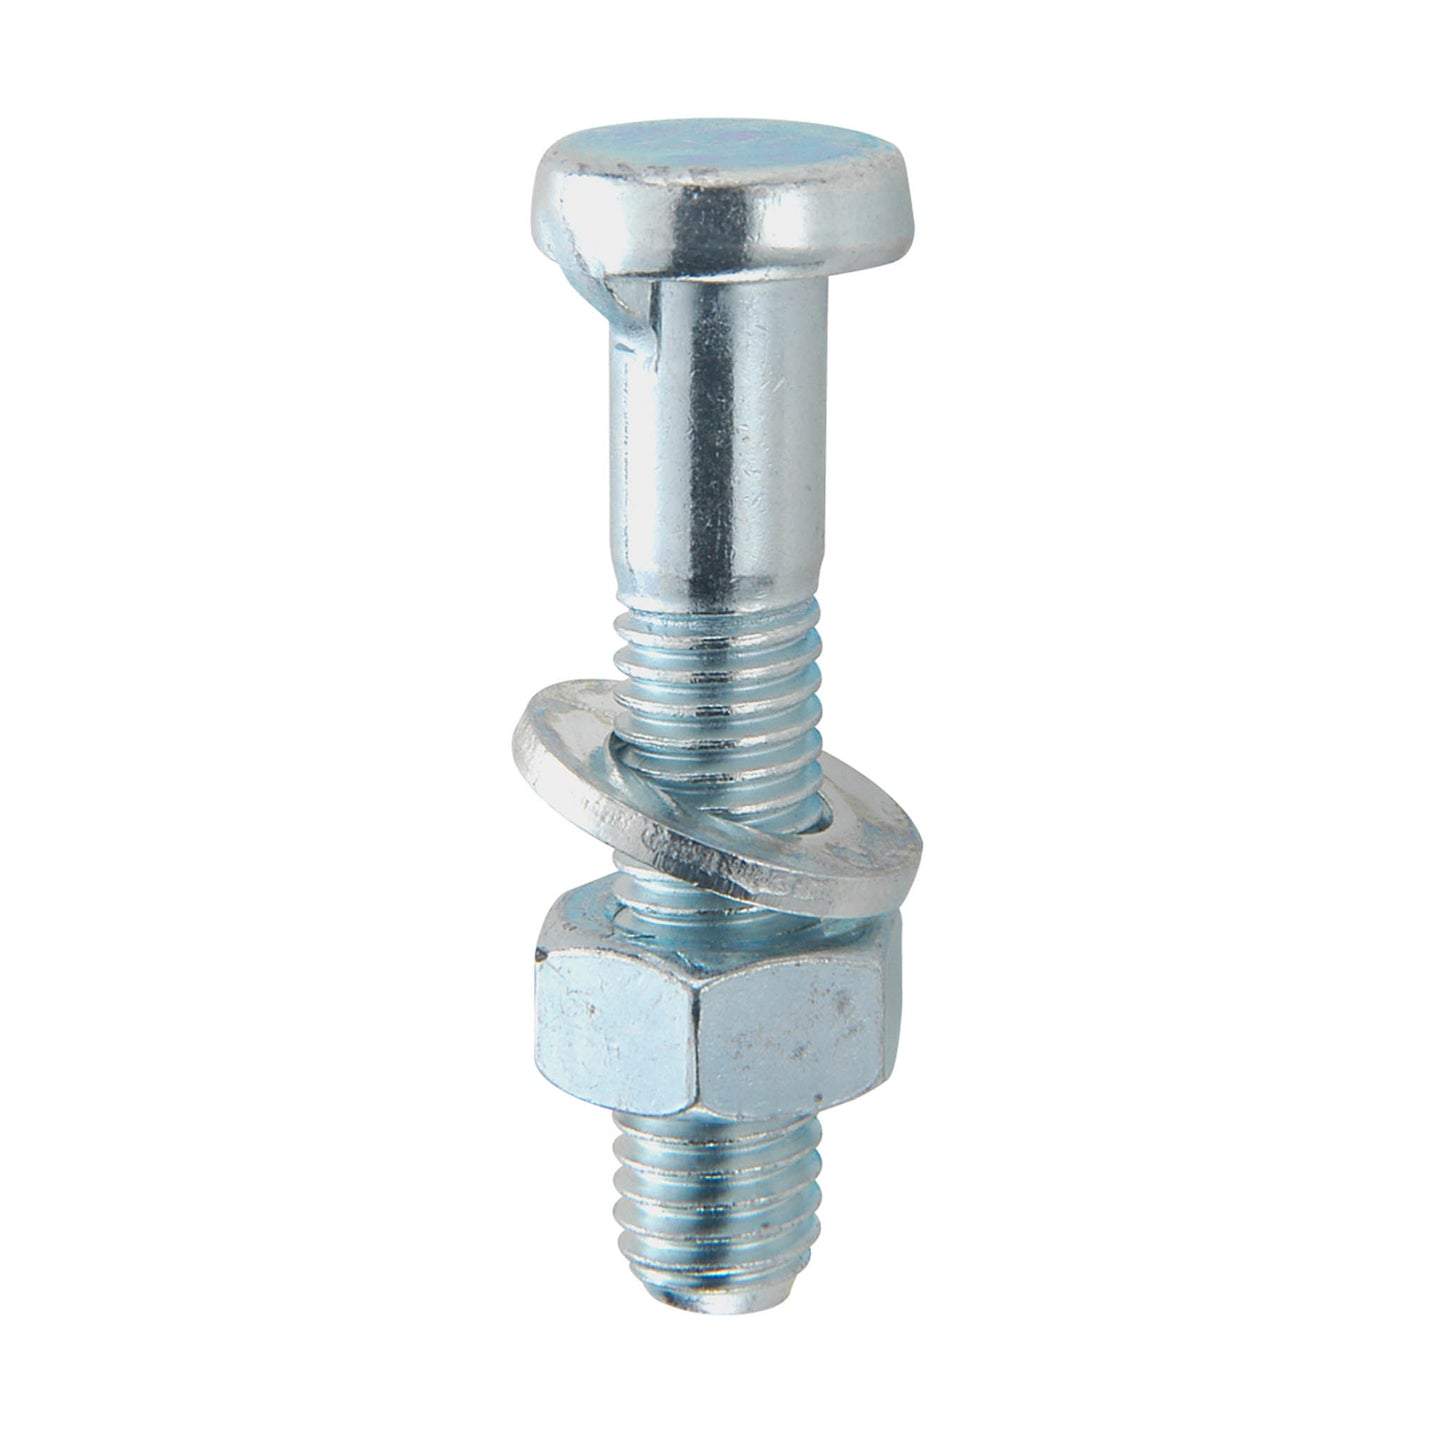 Handlebar and seat post clamping bolts M 8 x 55 set, galvanized steel